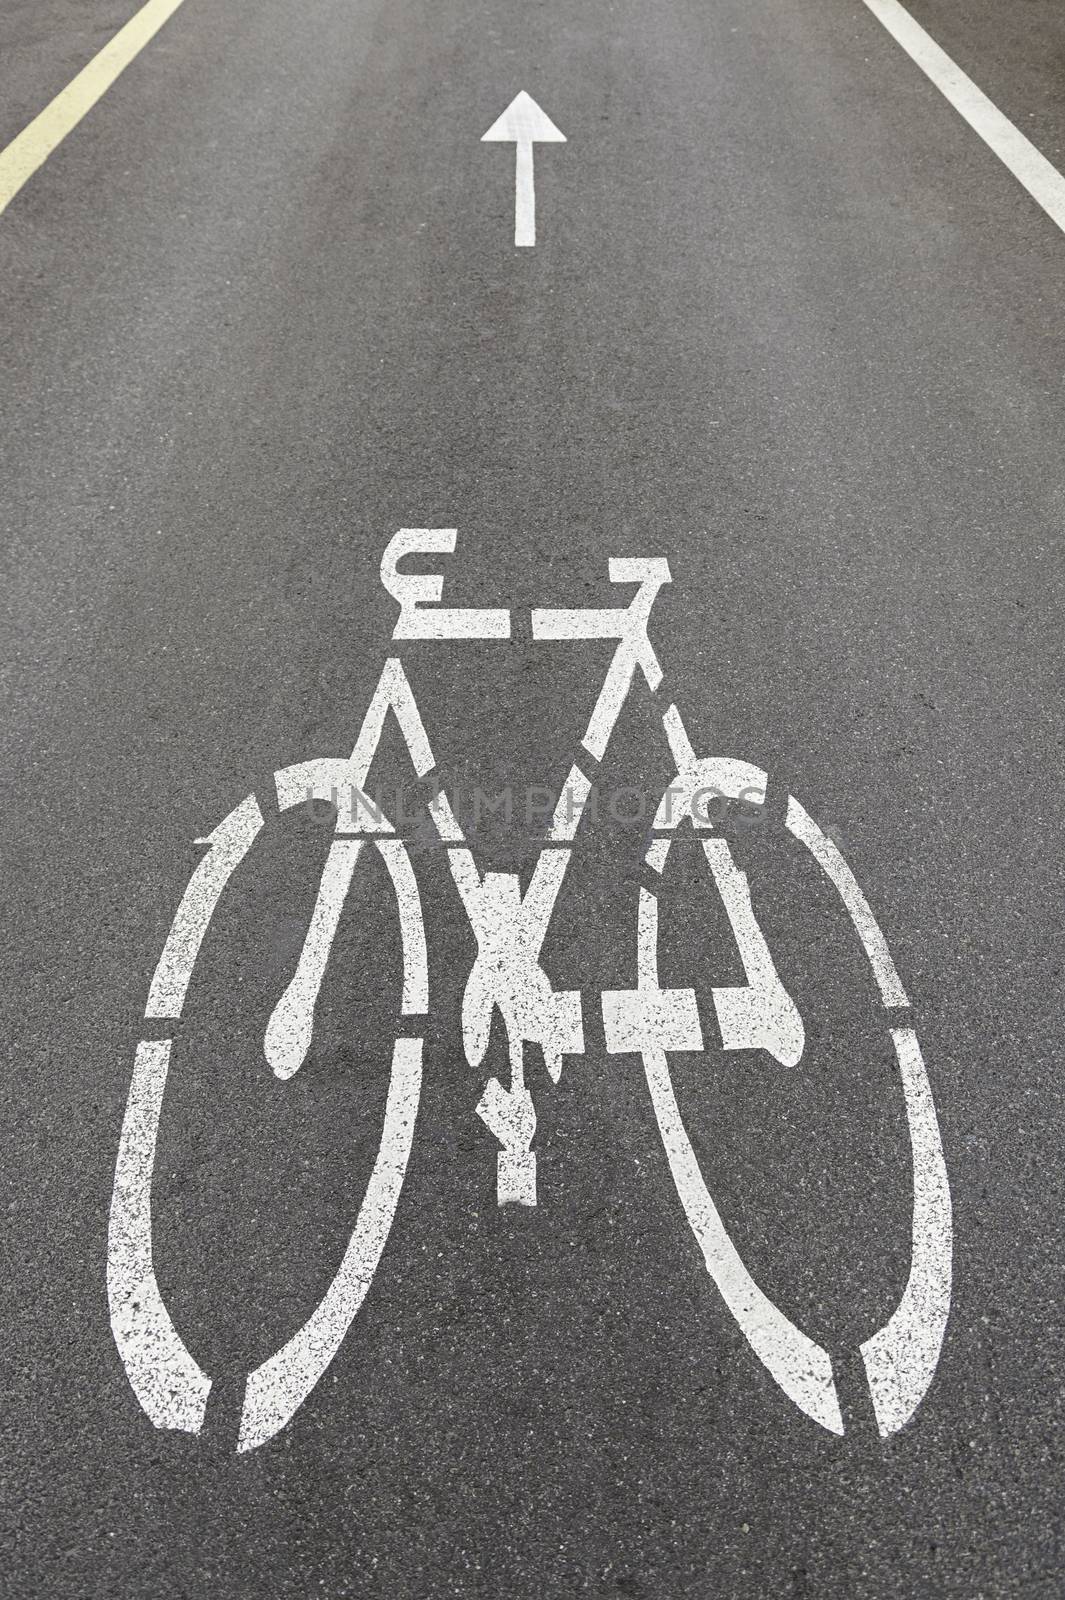 Bike sign on asphalt, detail of a sign painted on a road information, signal and arrow